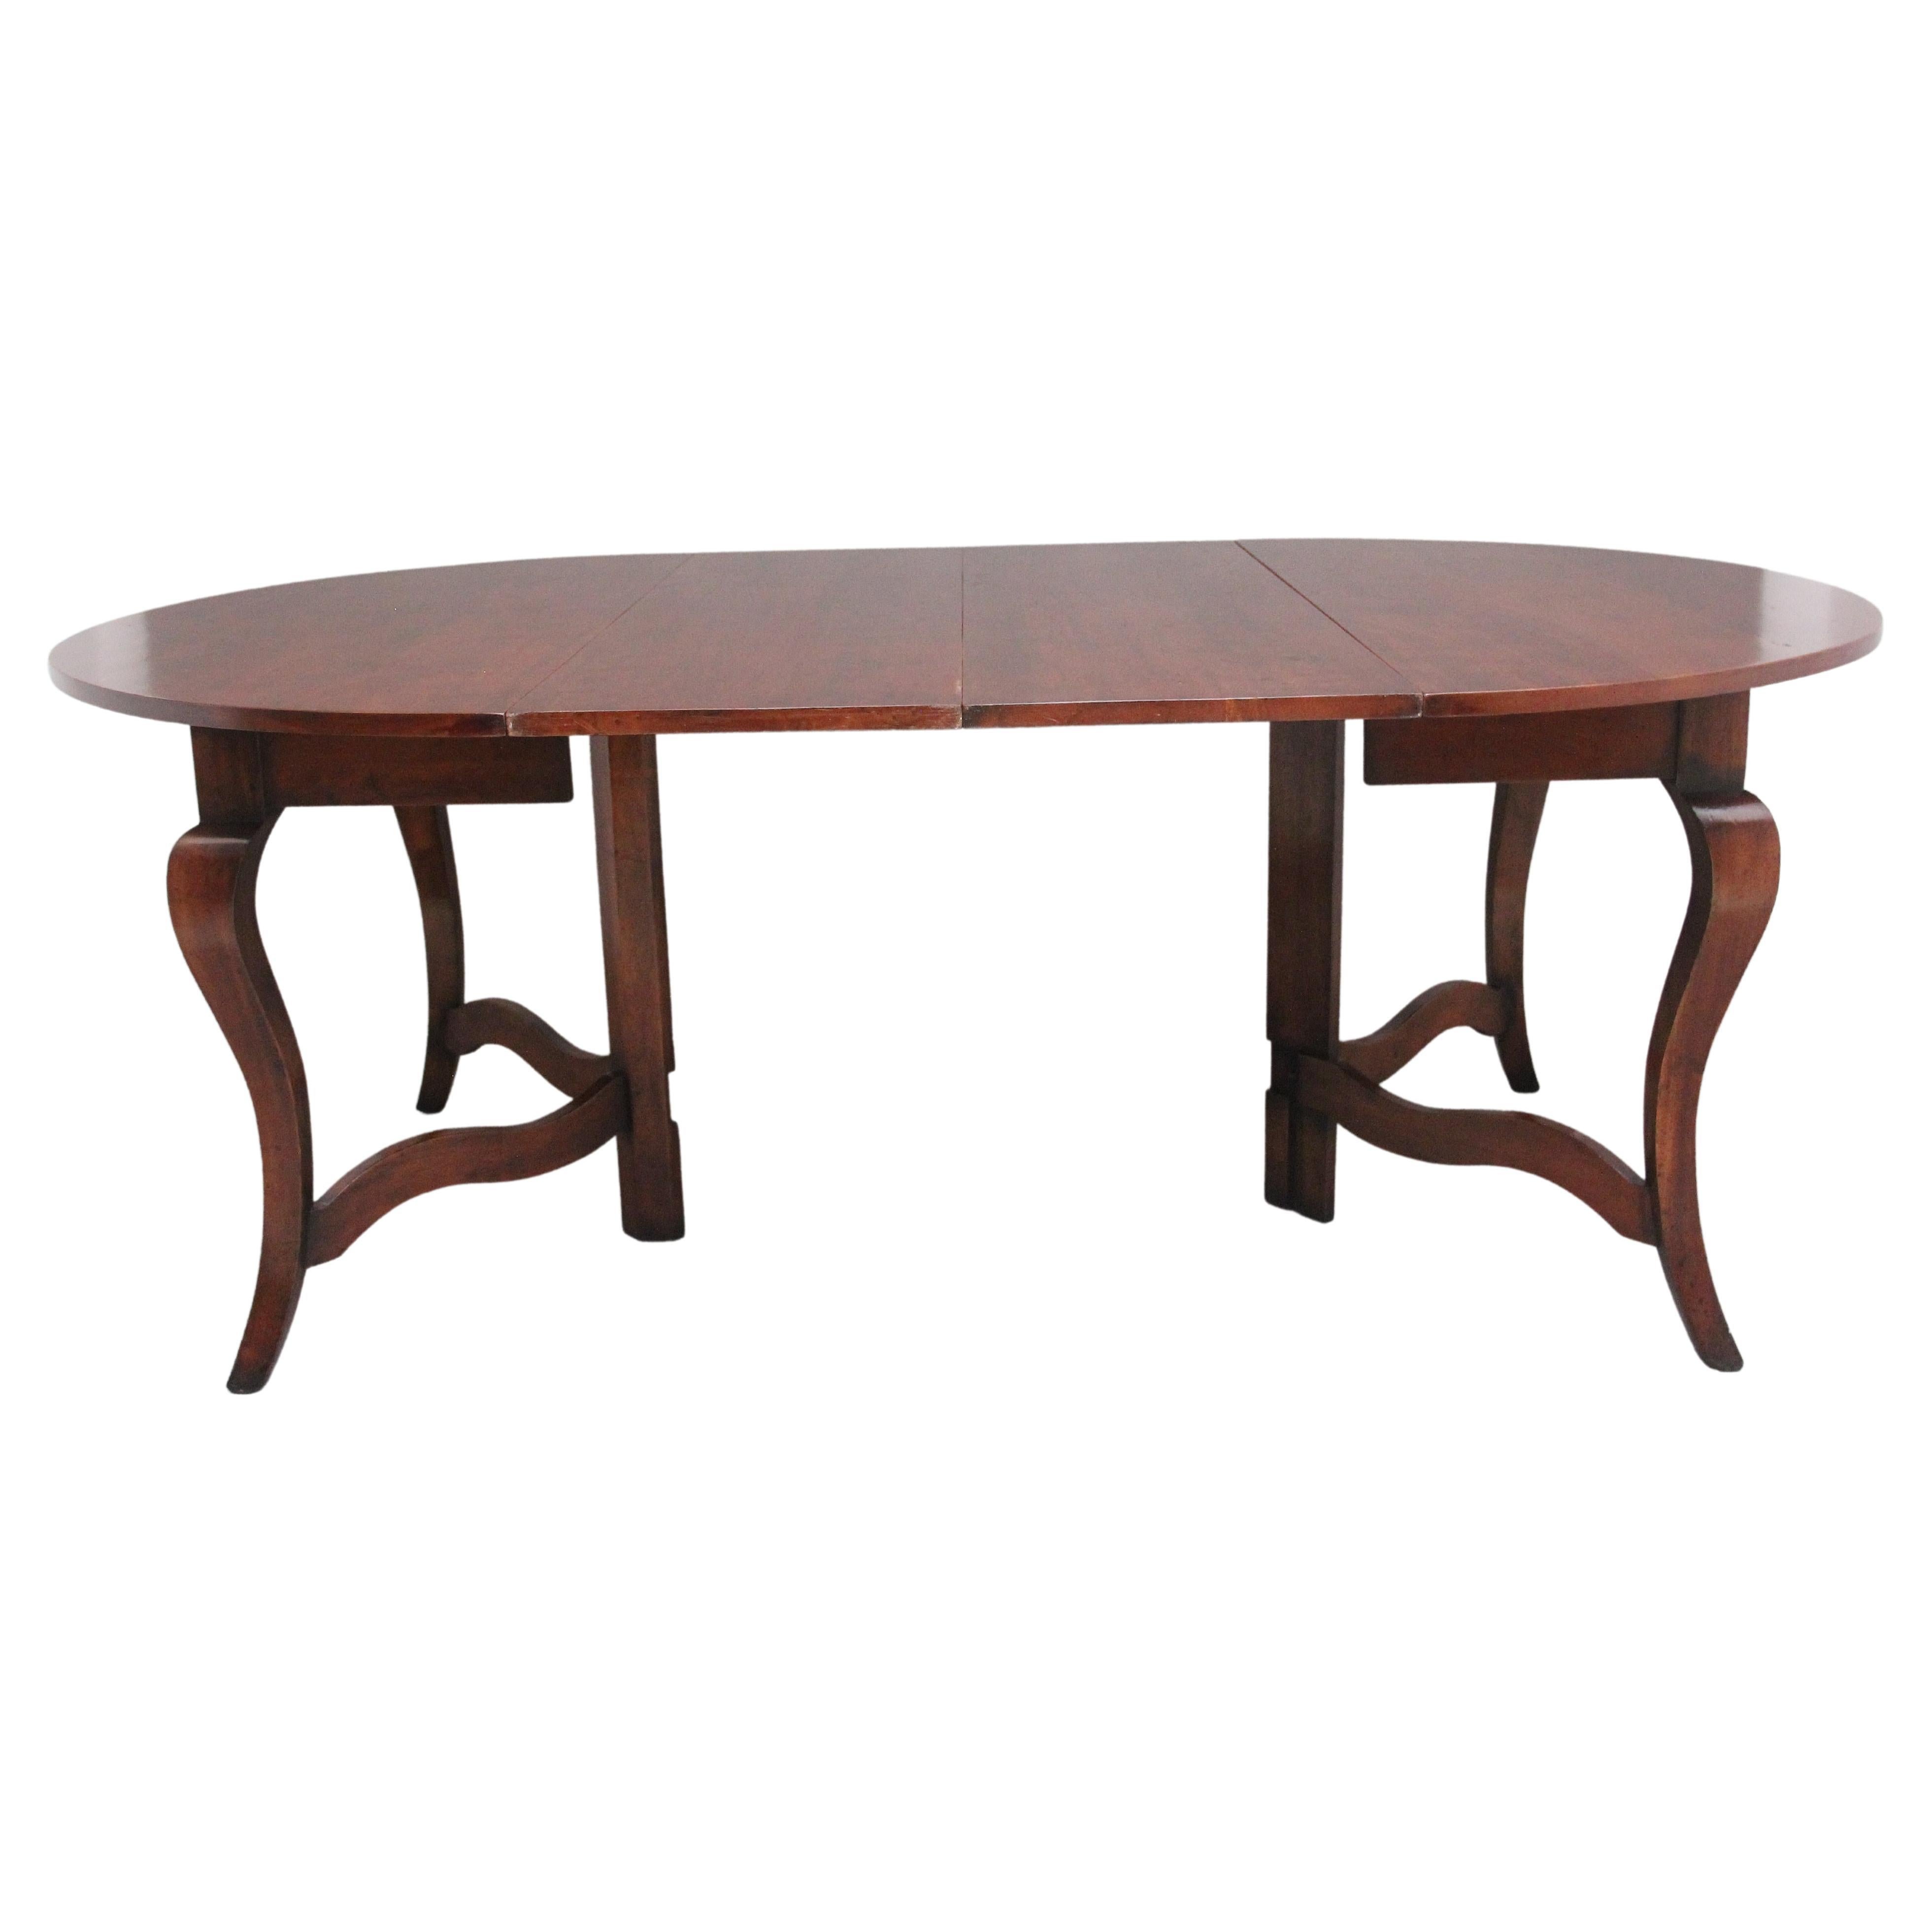 Cherry wood extending dining table For Sale